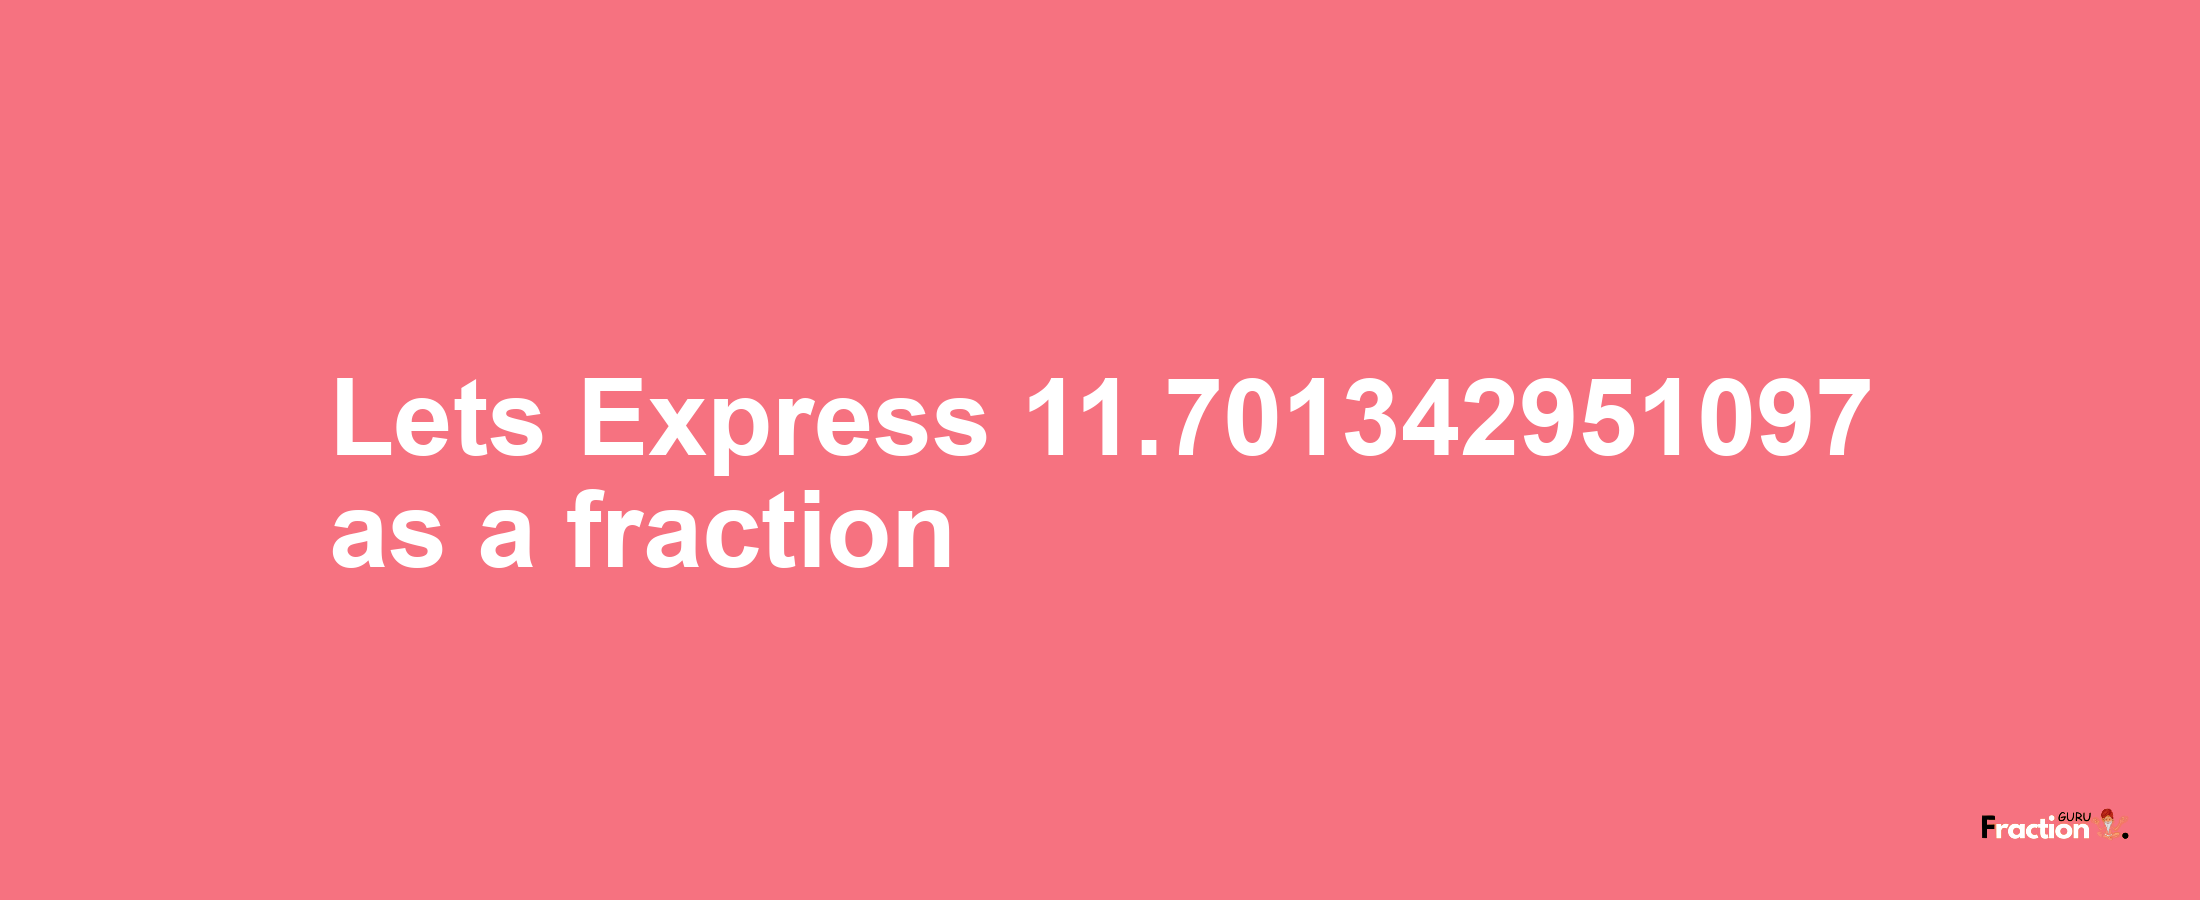 Lets Express 11.701342951097 as afraction